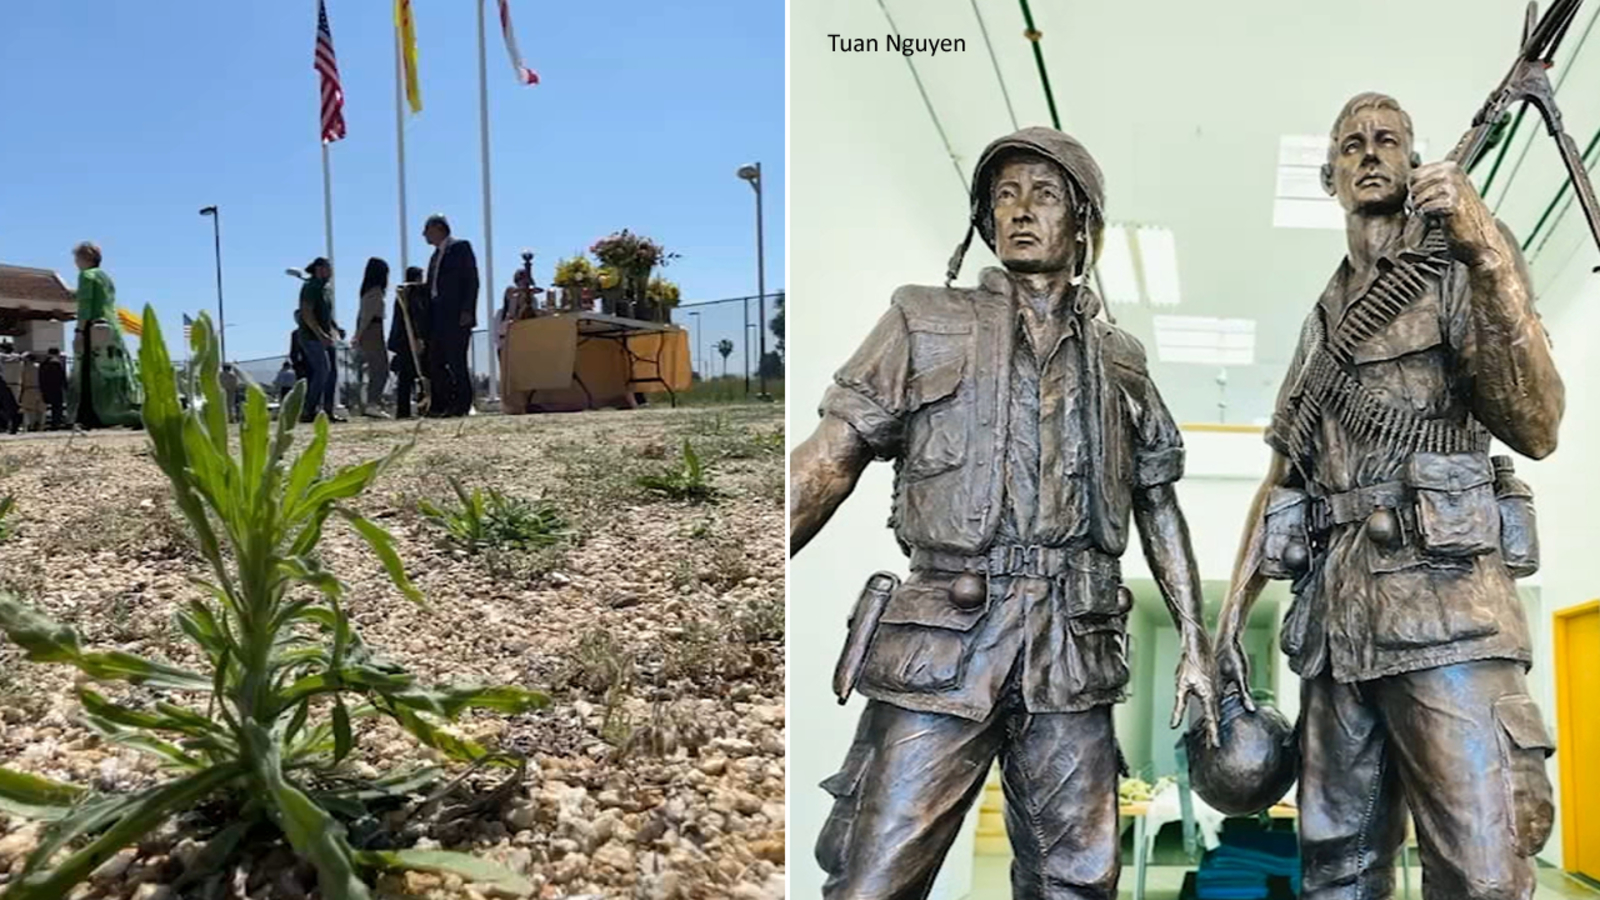 San Jose breaks ground on long-delayed Vietnamese Heritage Garden statue project to honor all those who fought in Vietnam War [Video]